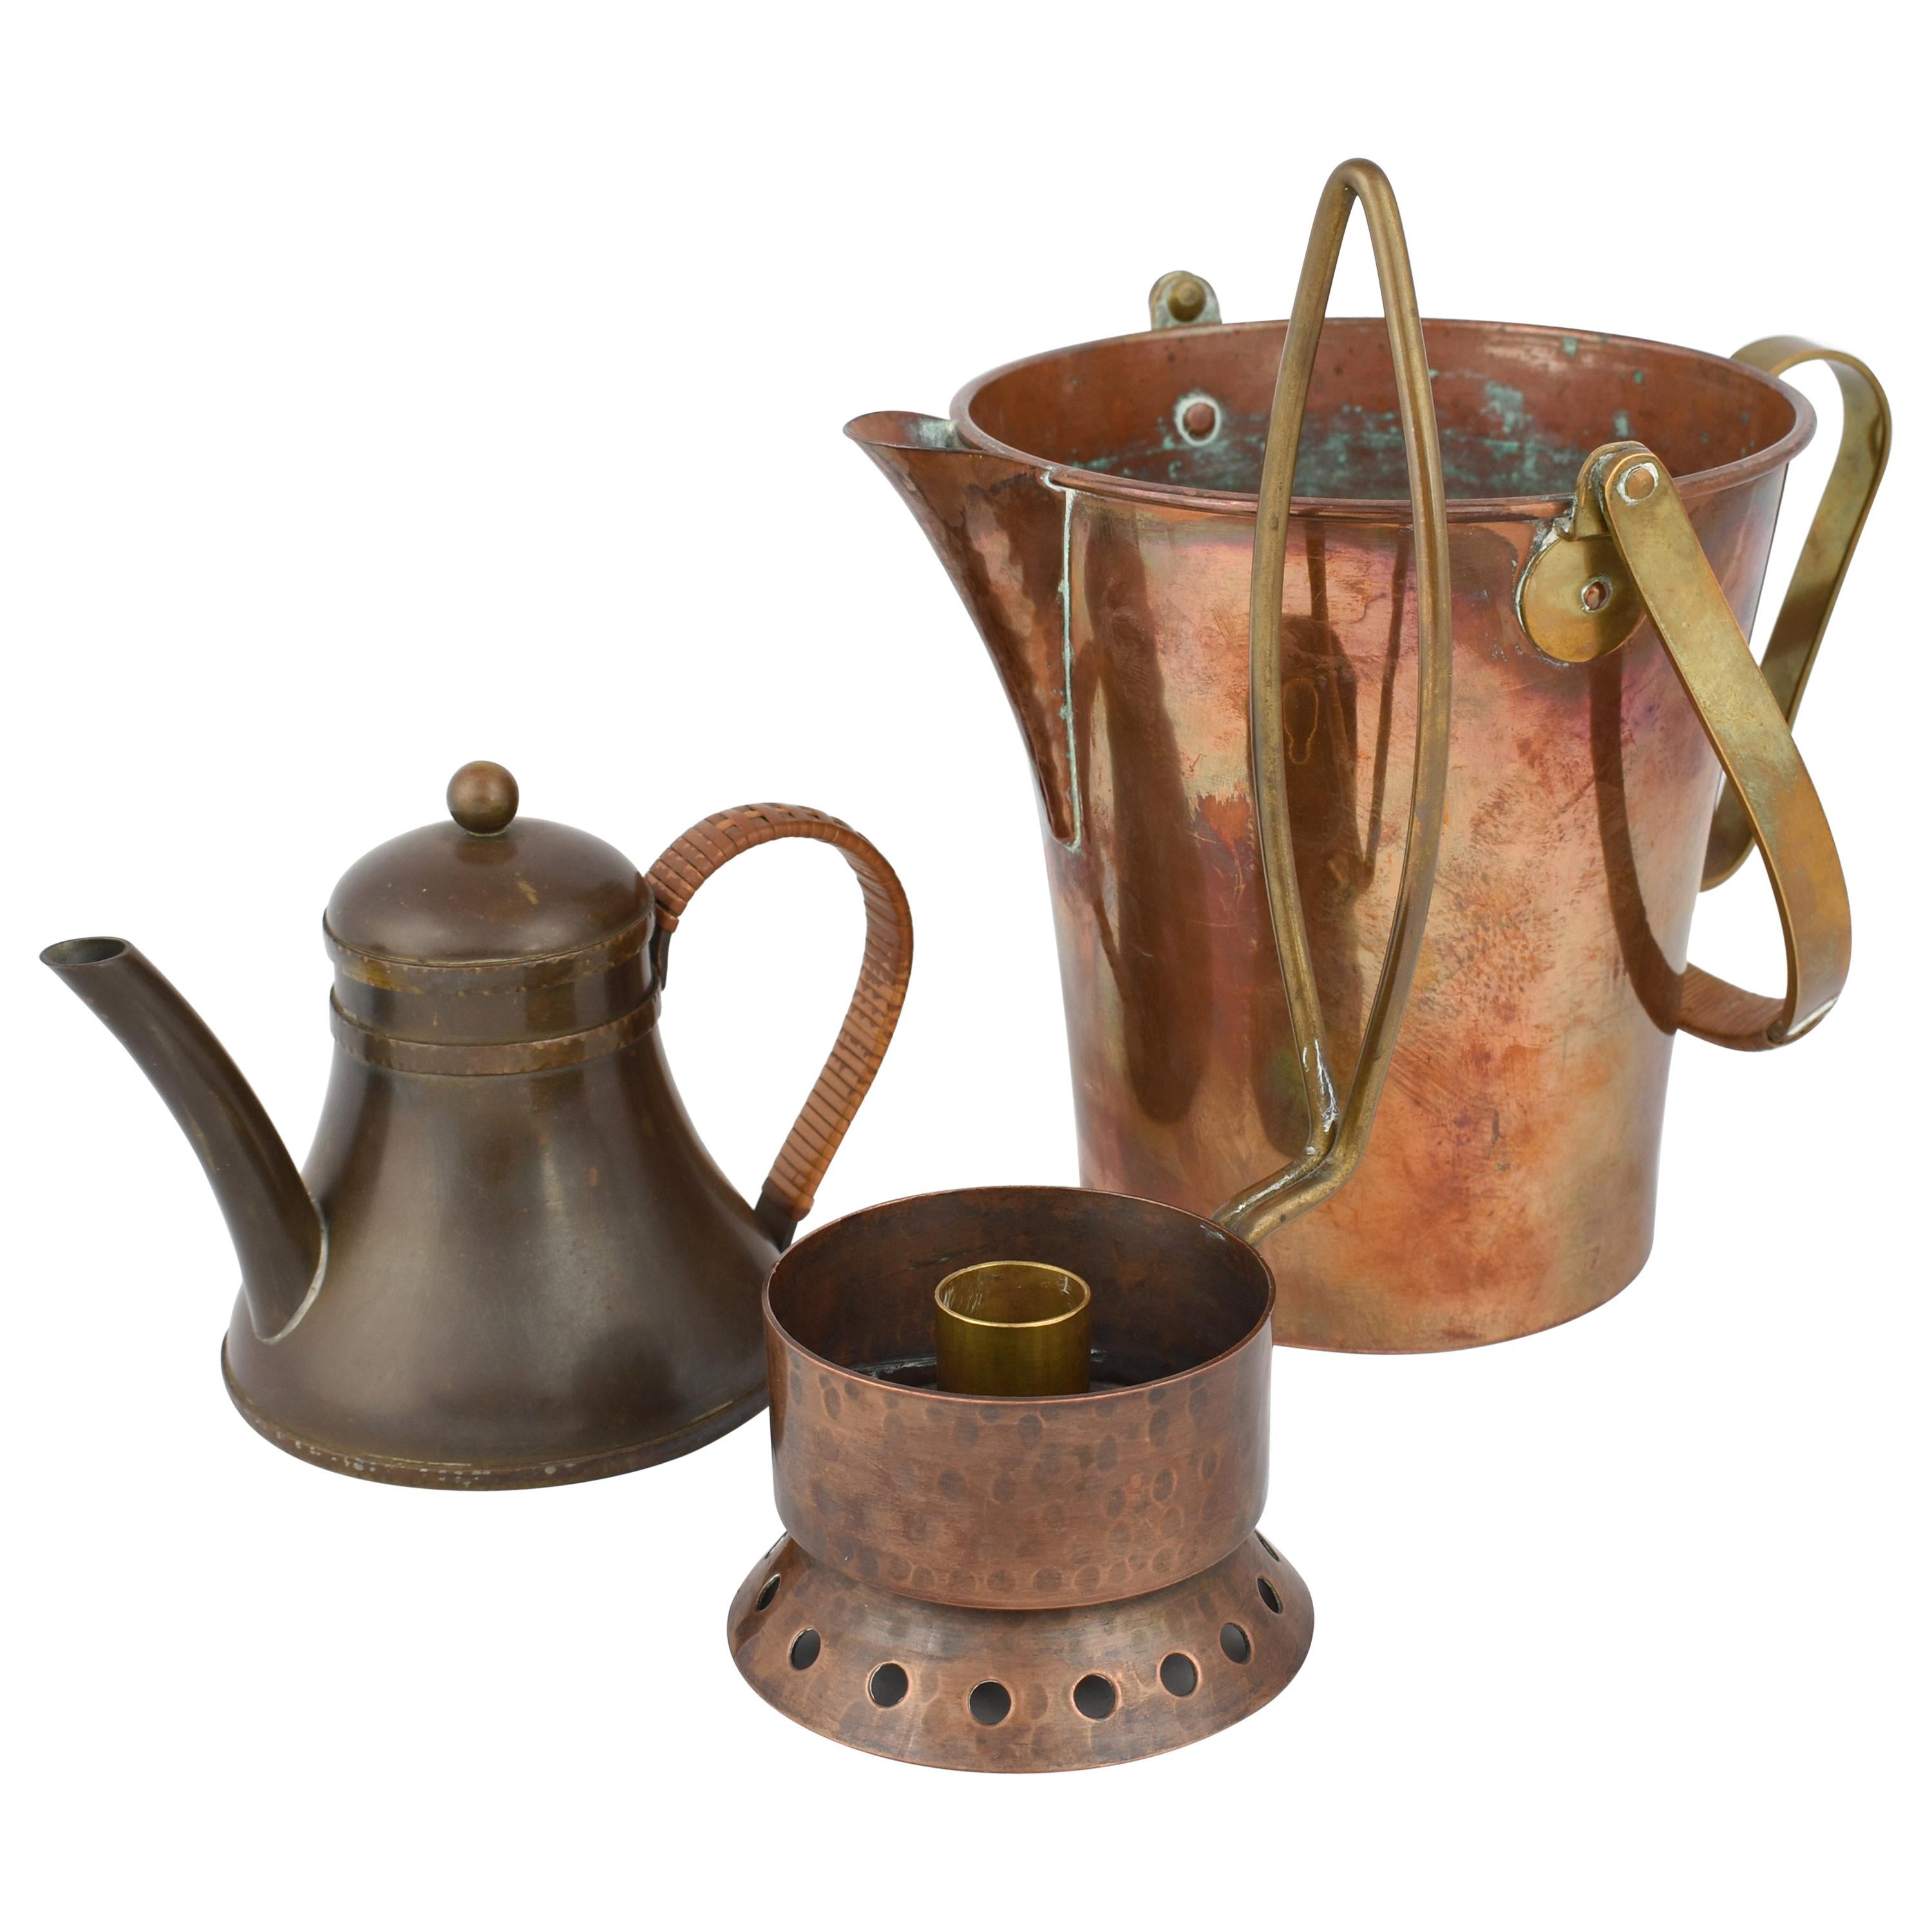 Vintage Copper Set by Harald Buchrucker, Germany, 1950s